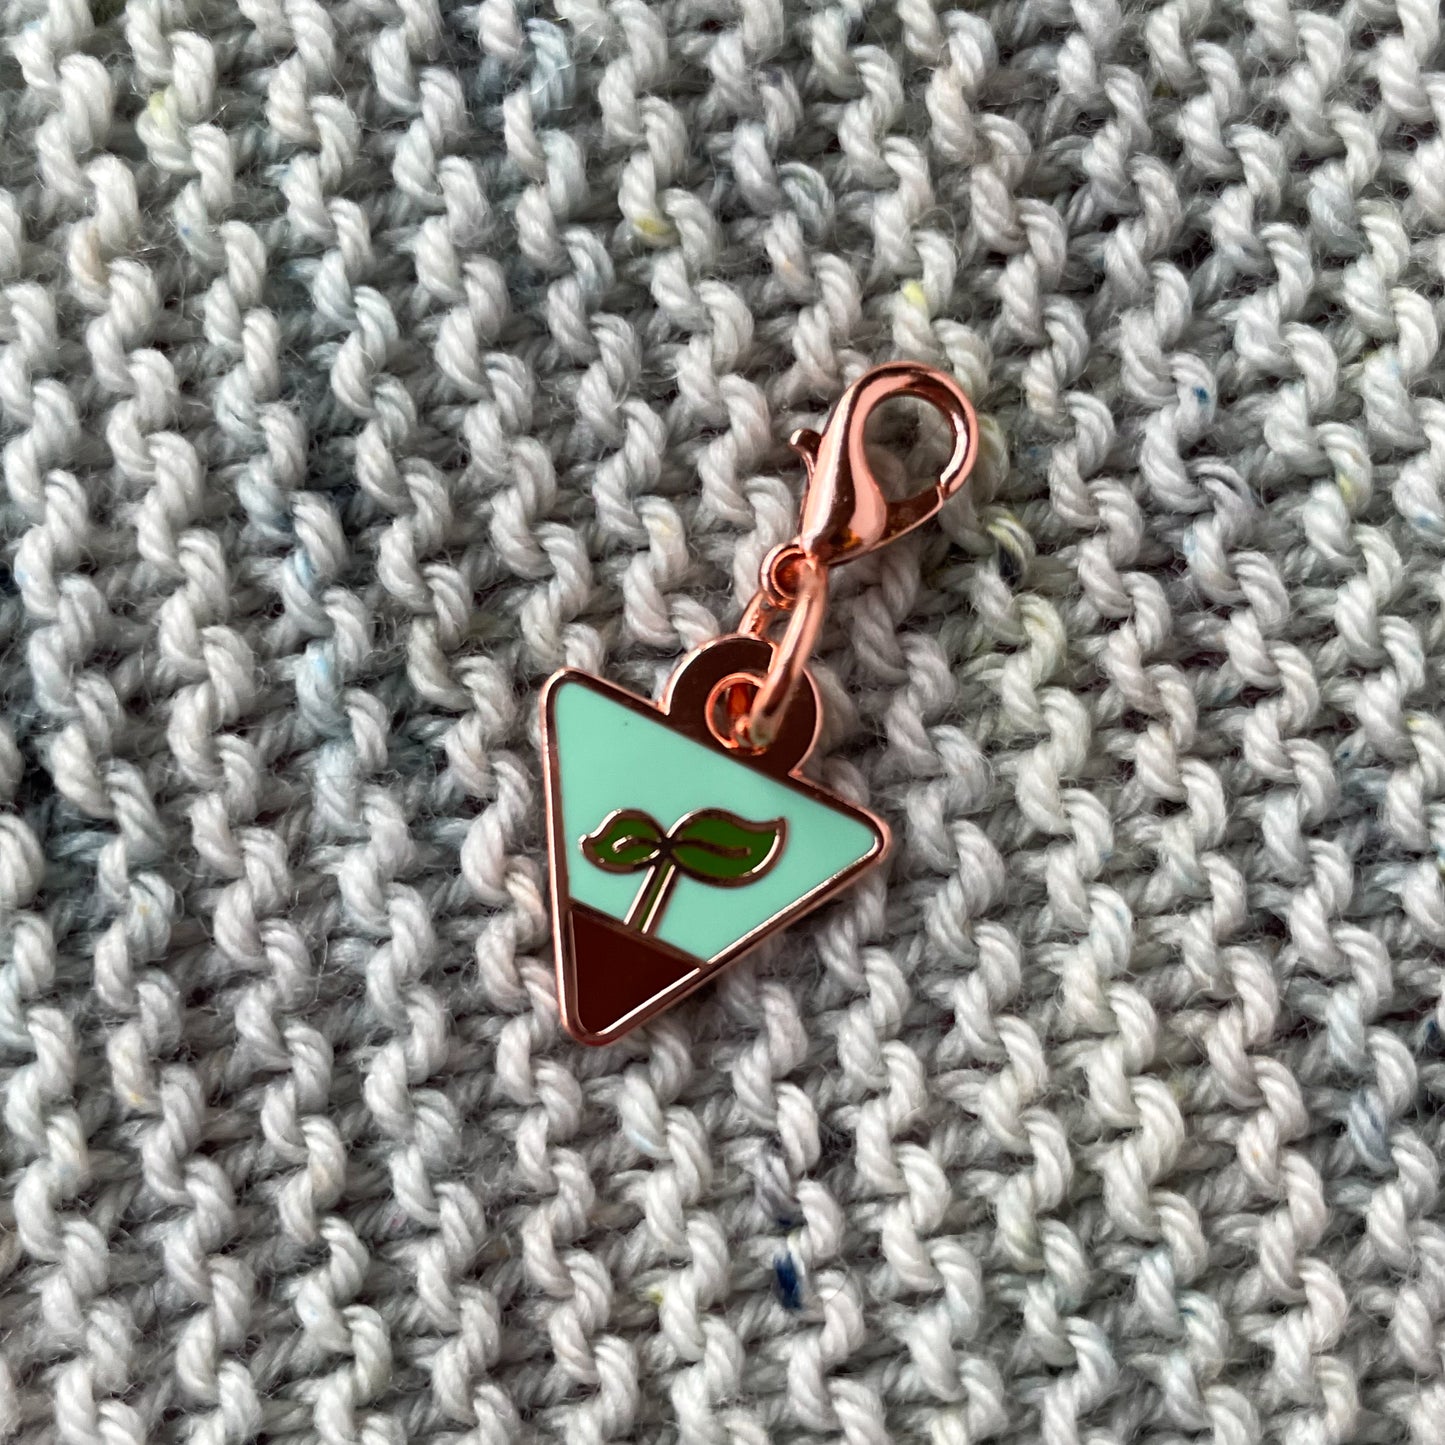 An upside down triangle charm with a small plant sprout on it, sitting on a background of hand knit garter stitch fabric in grey yarn.